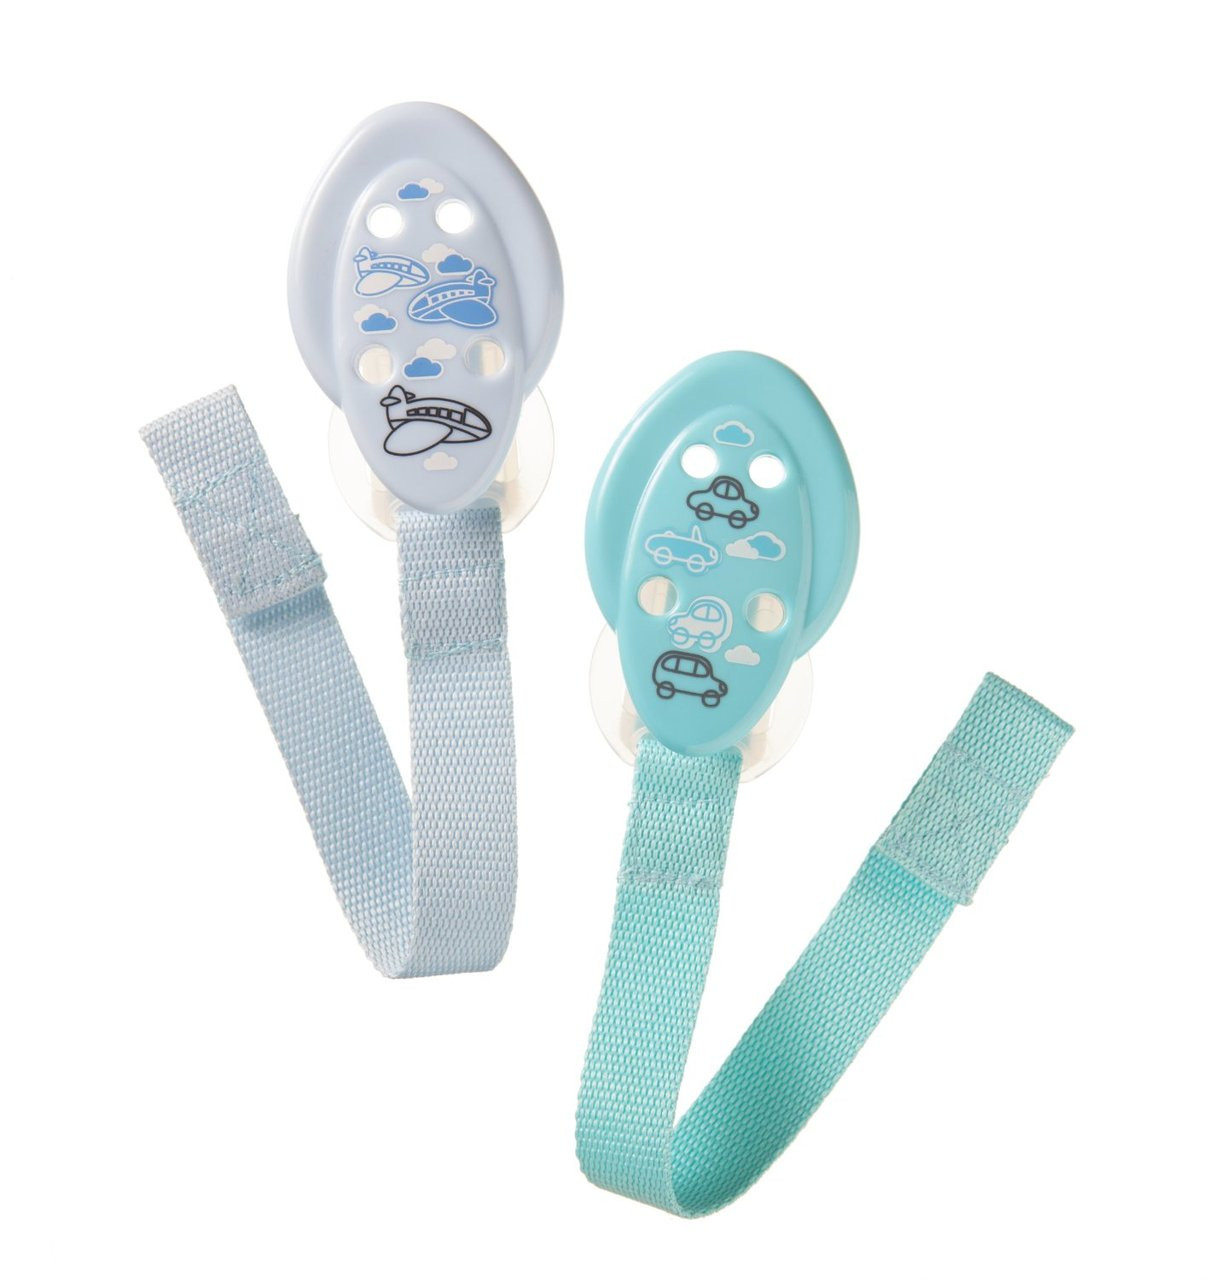 Tommee Tippee Pacifier Holder - Parents' Favorite